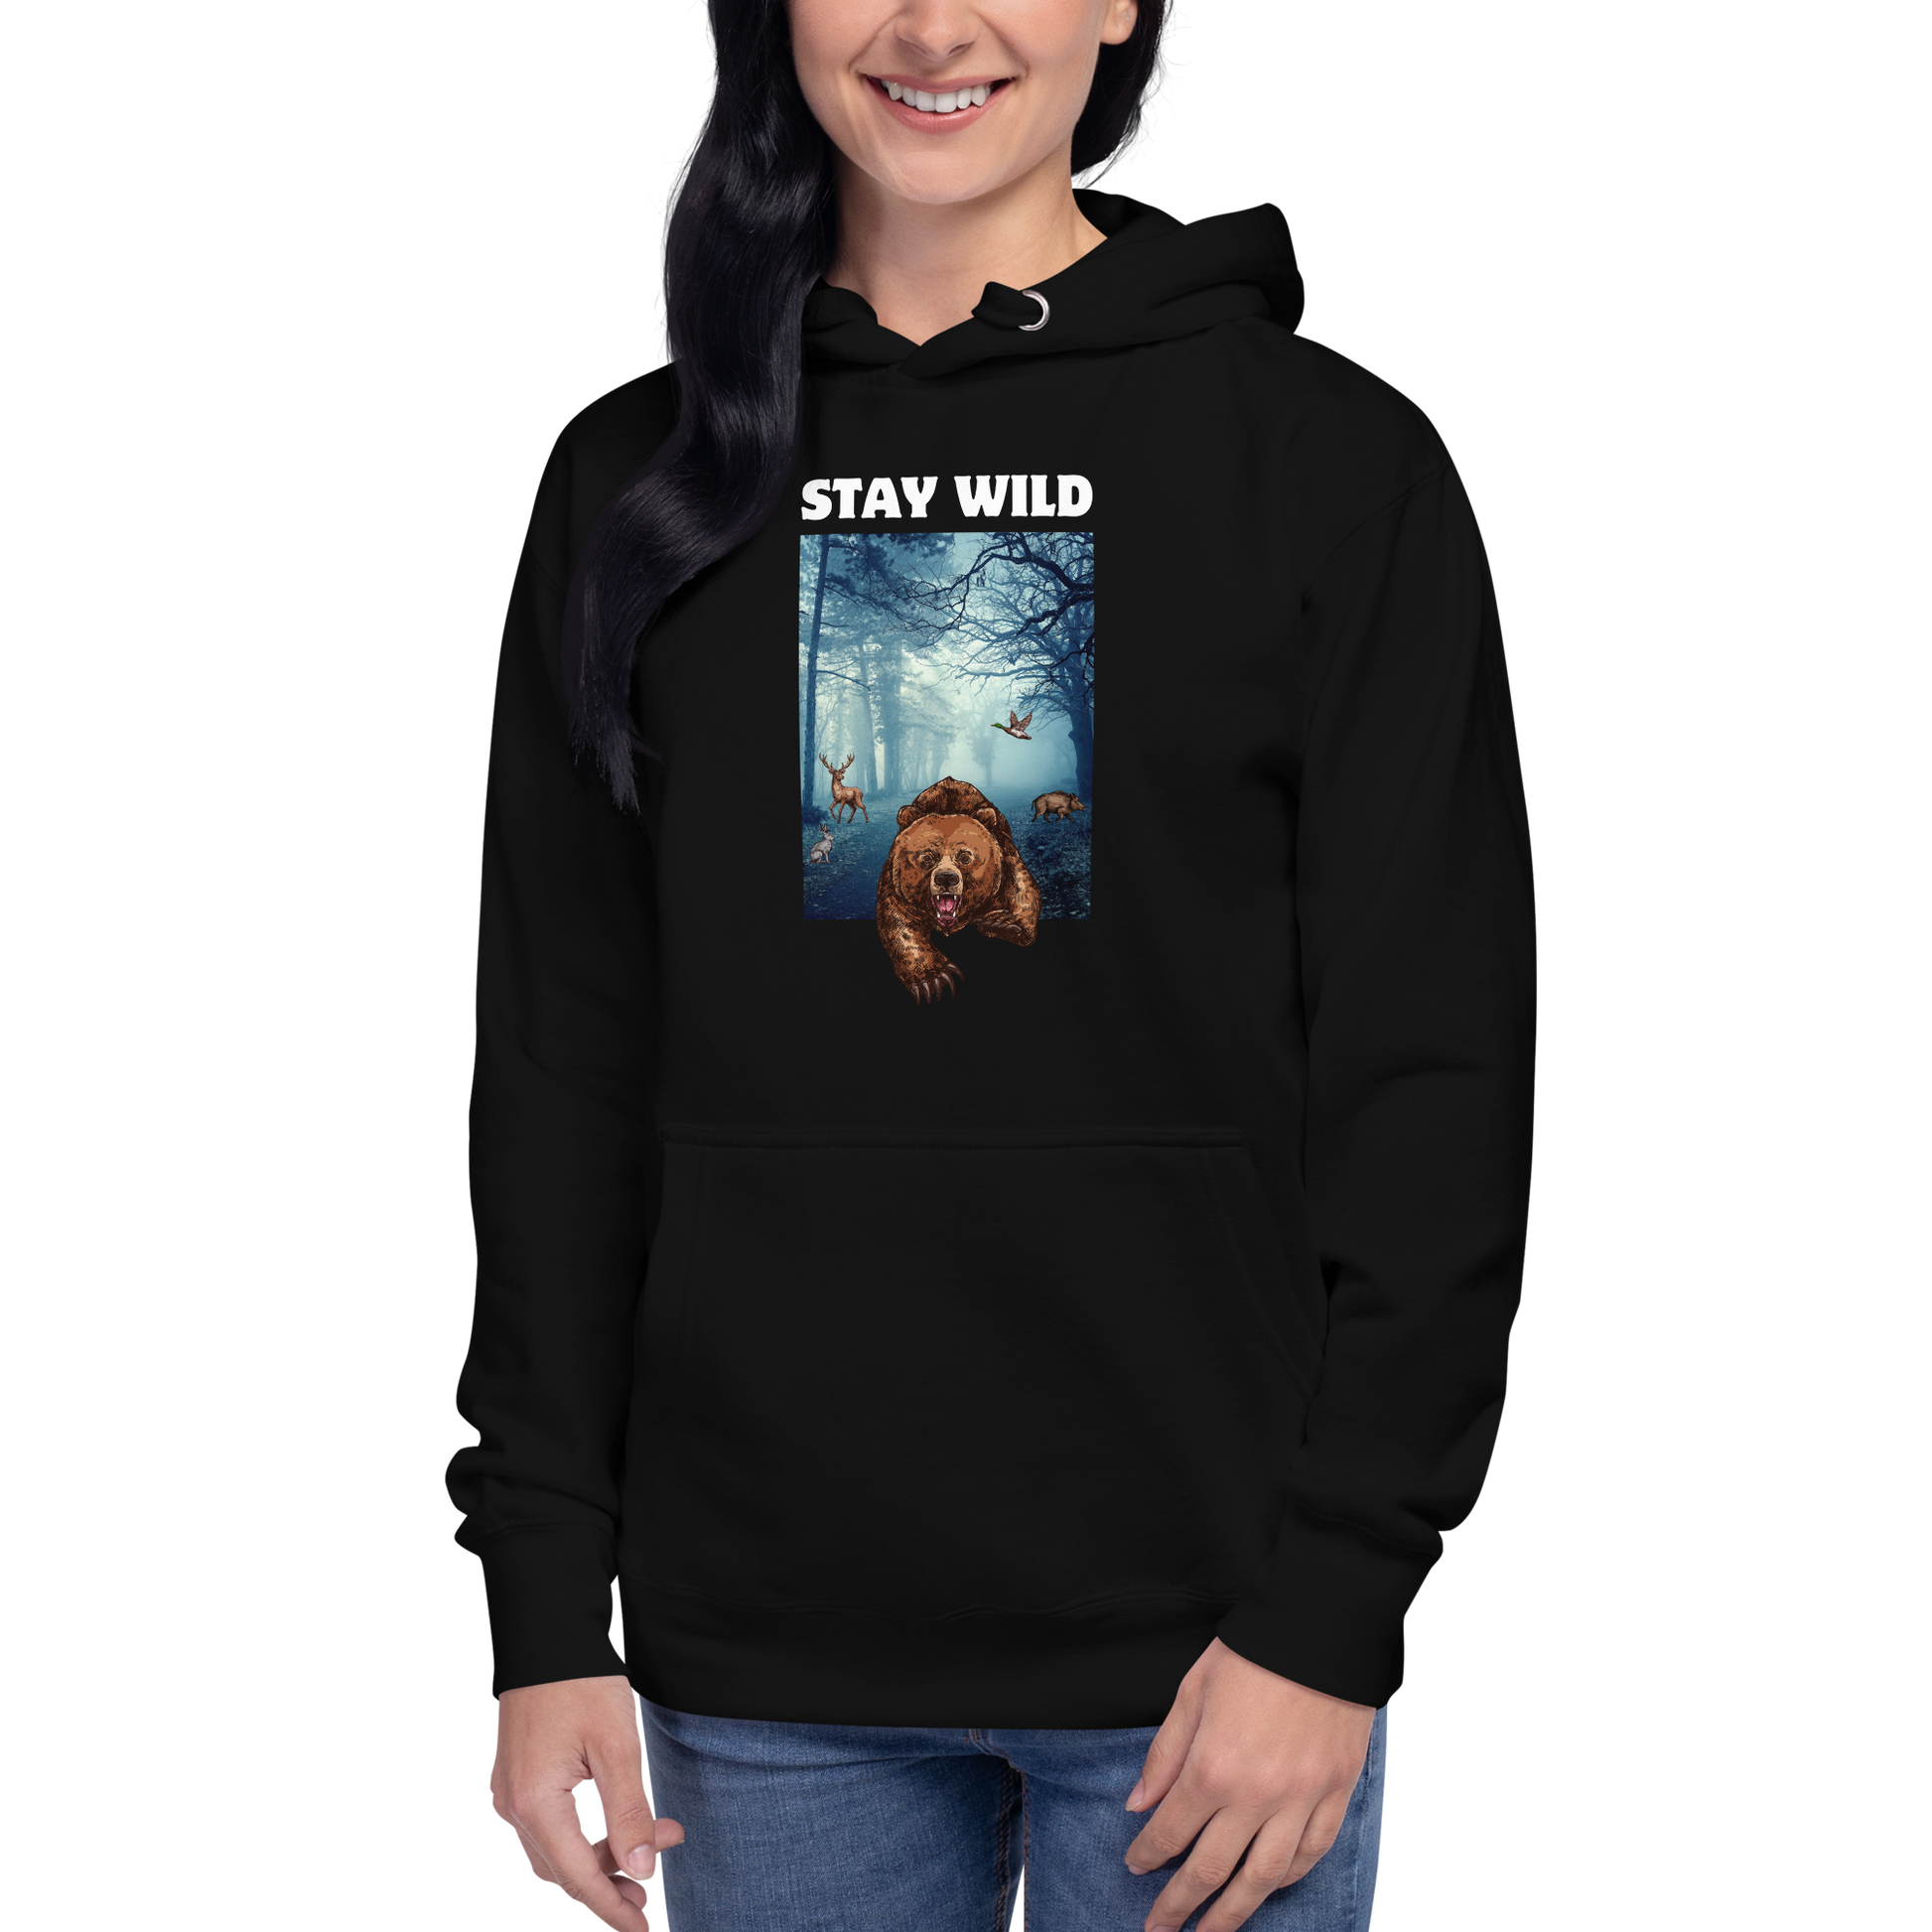 Woman wearing a Black Premium Bear Hoodie featuring a Stay Wild graphic on the chest - Cool Graphic Bear Hoodies - Boozy Fox